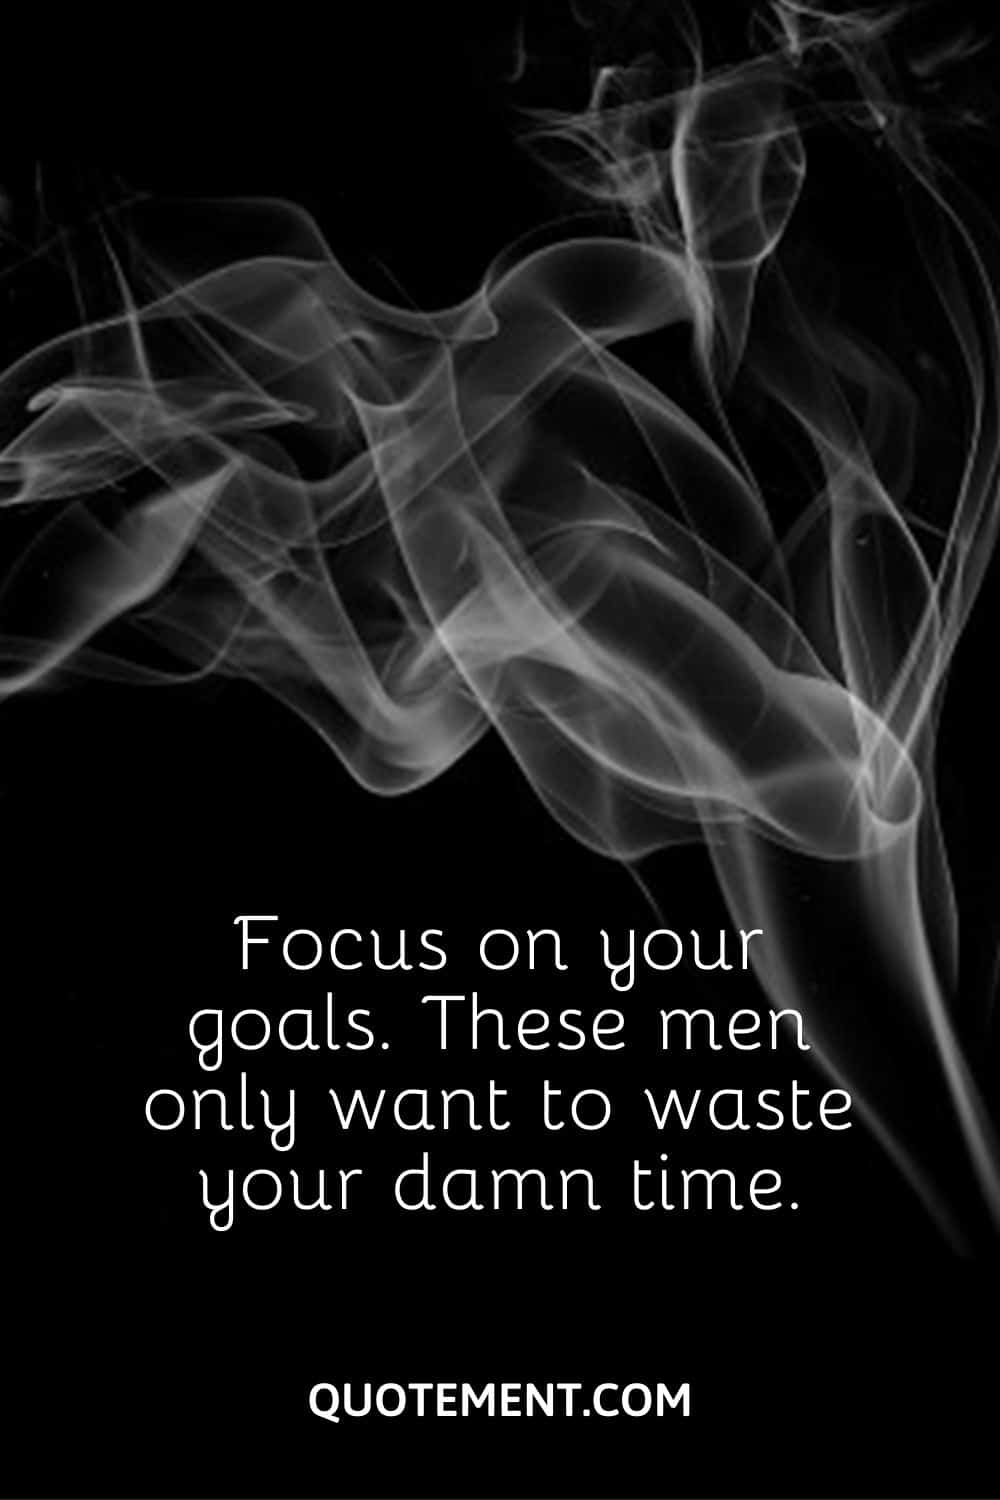 Focus on your goals. These men only want to waste your damn time.